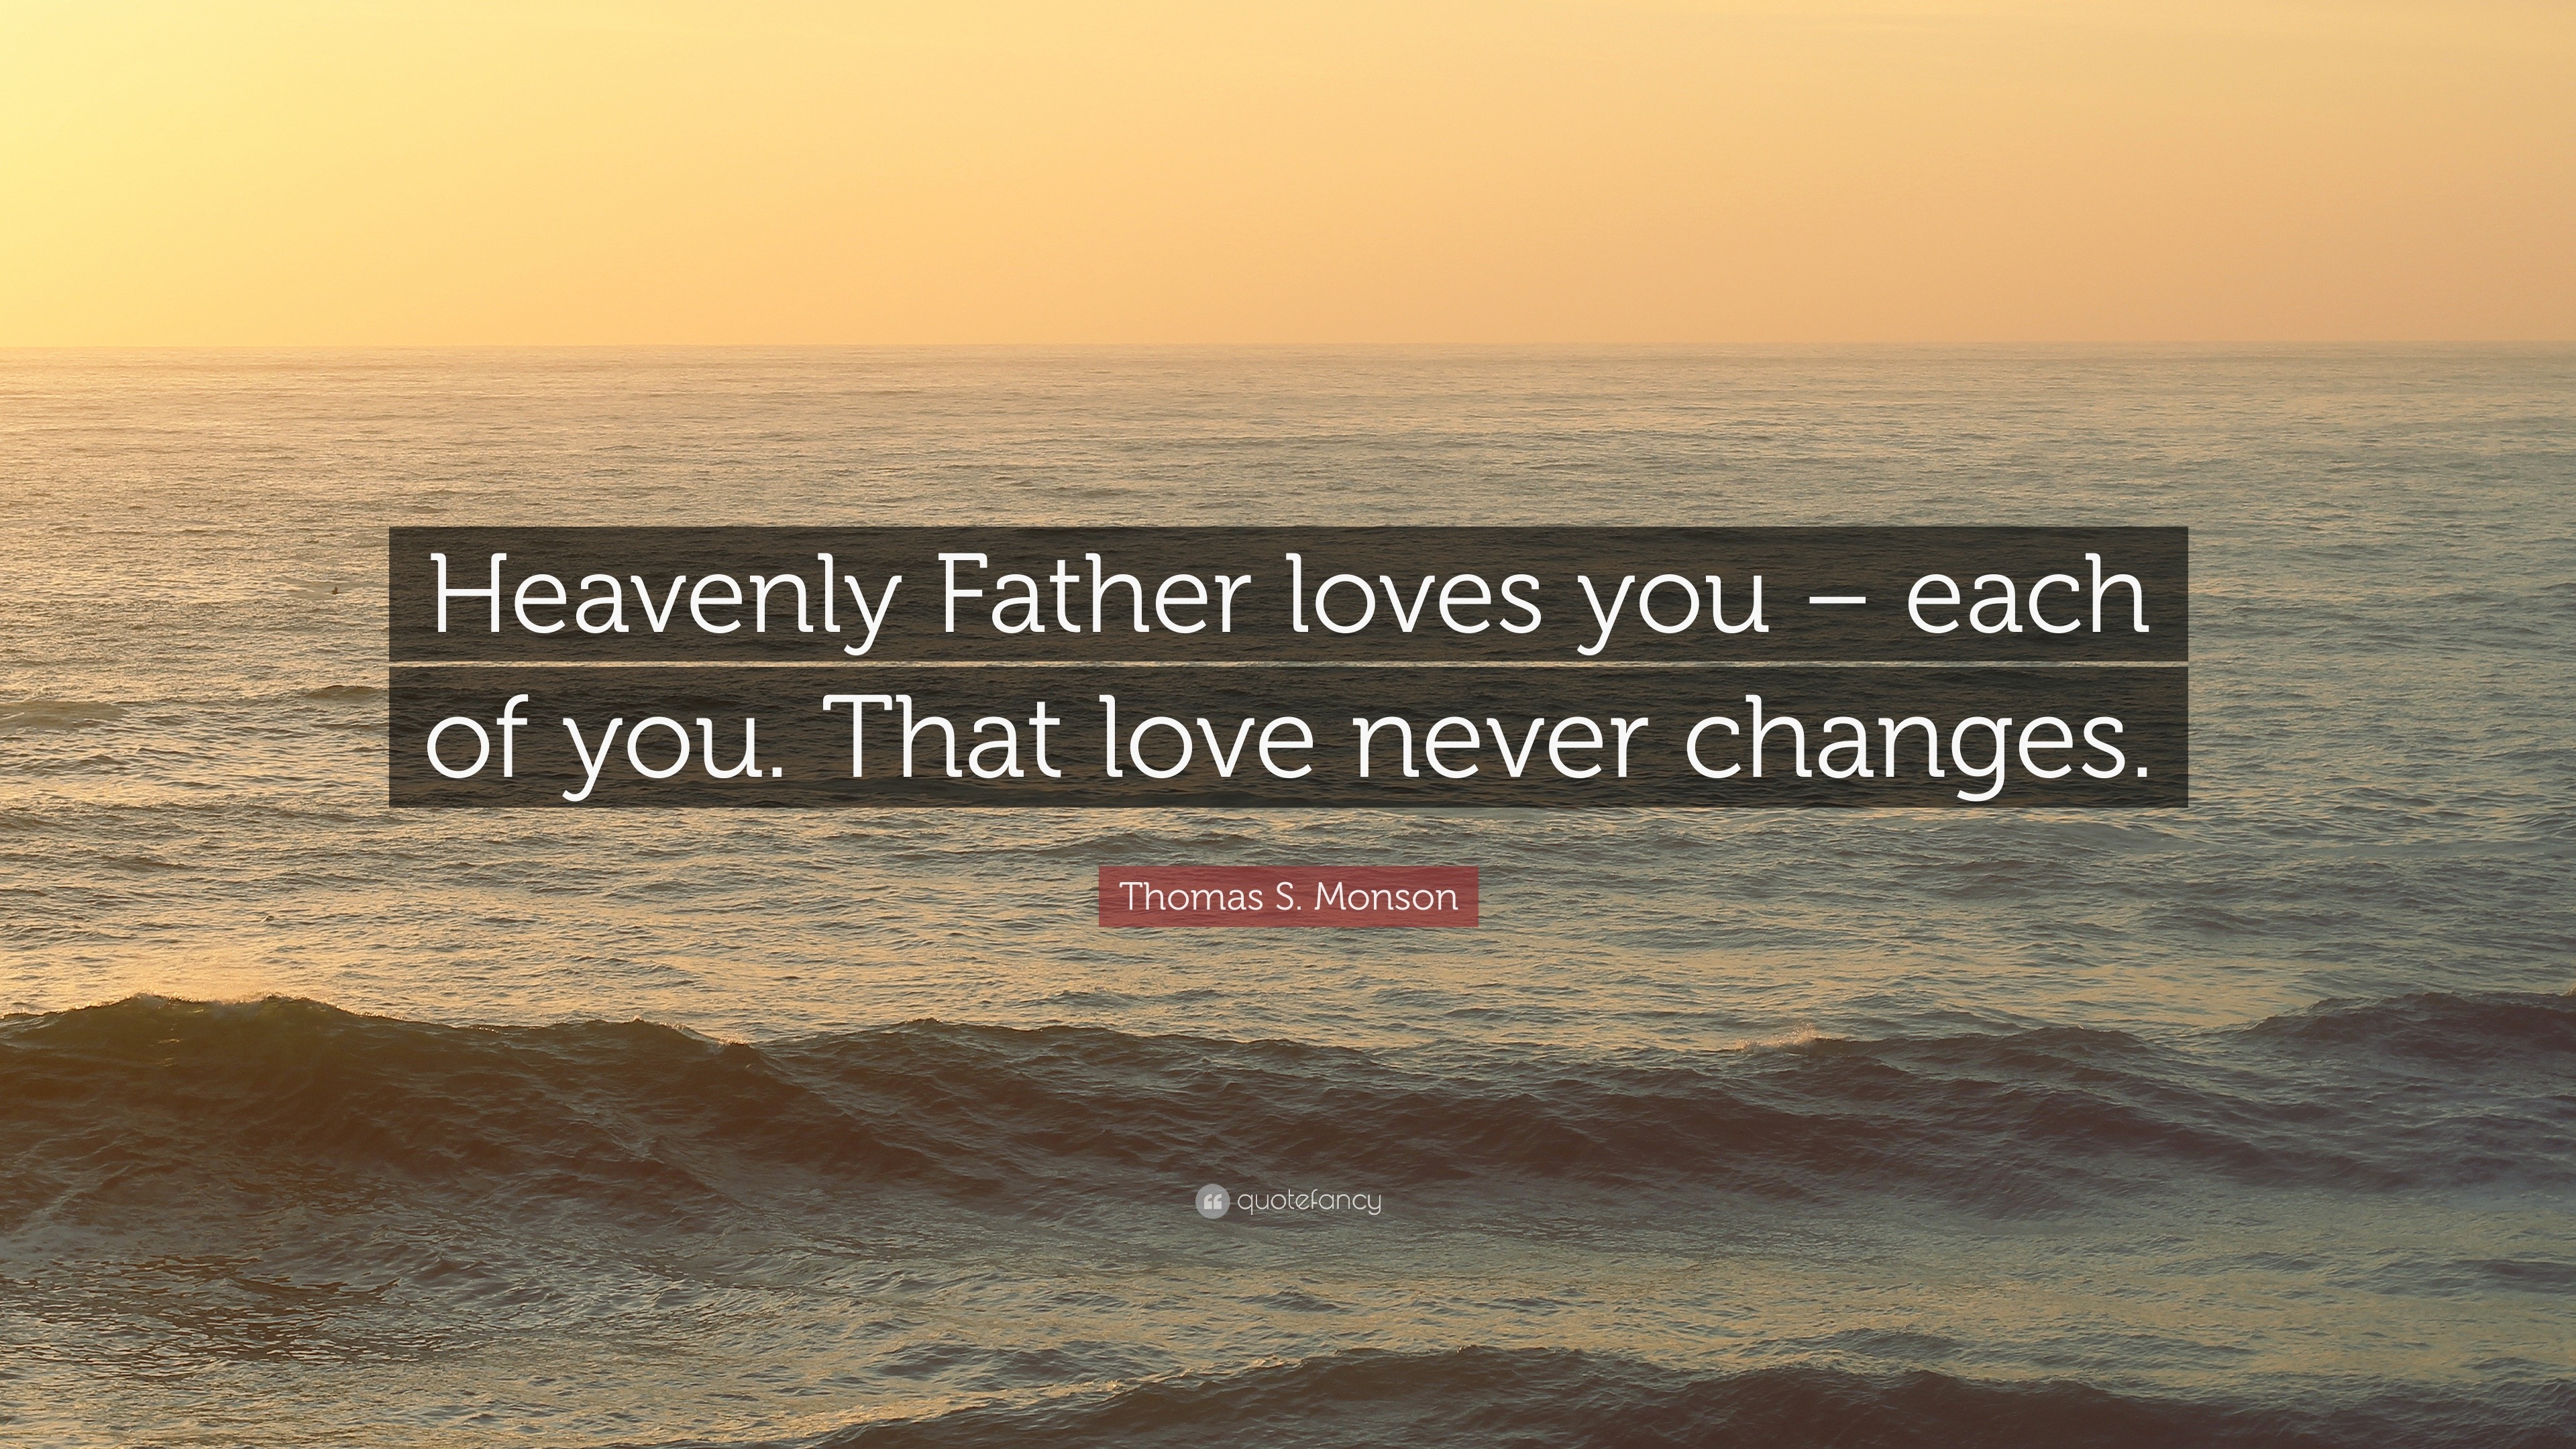 Thomas S Monson Quote “Heavenly Father loves you – each of you